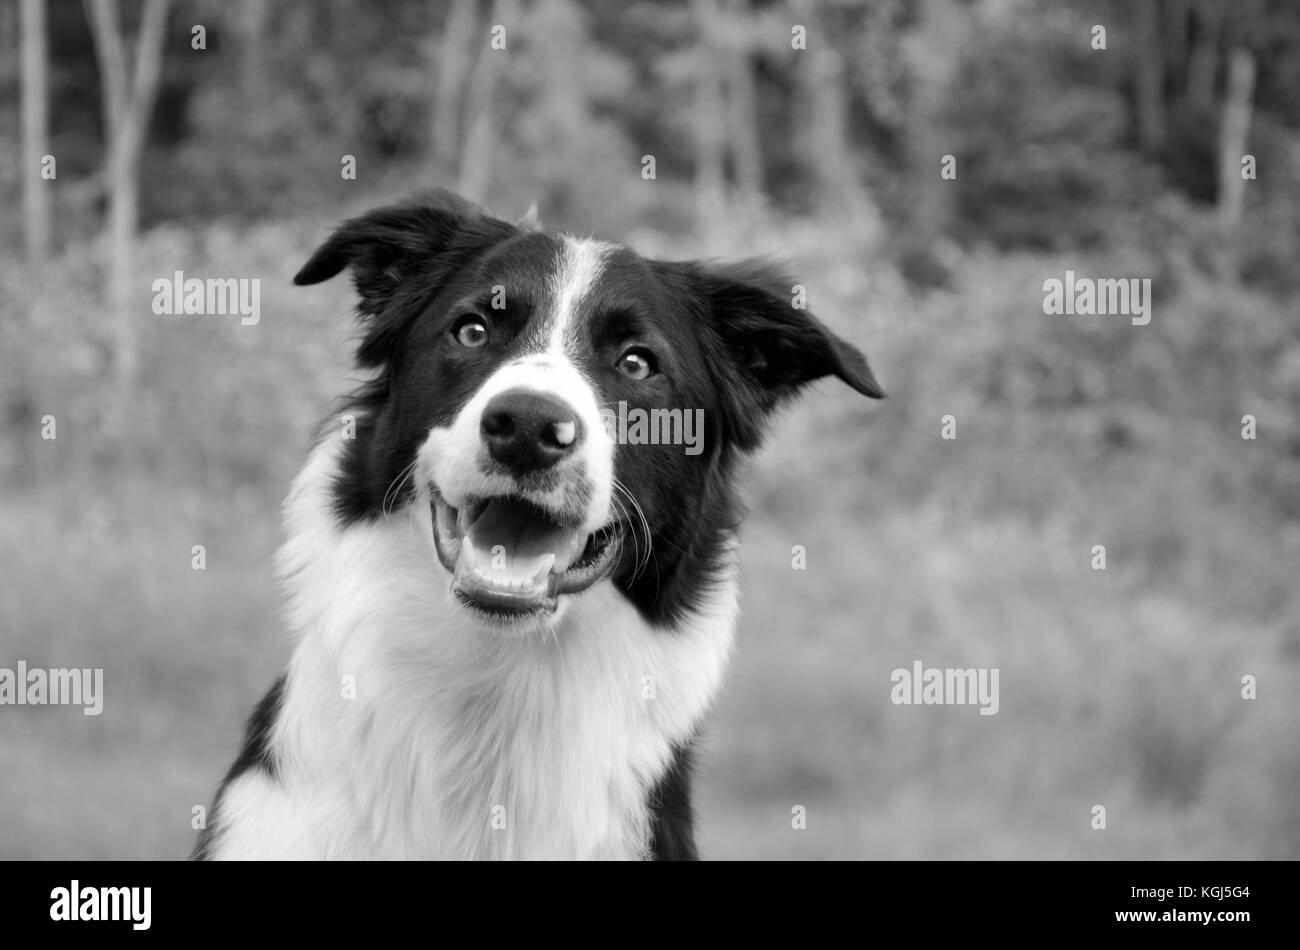 Border Collie full front profile view with trees in the background. A very focused and happy dog in black and white. Stock Photo